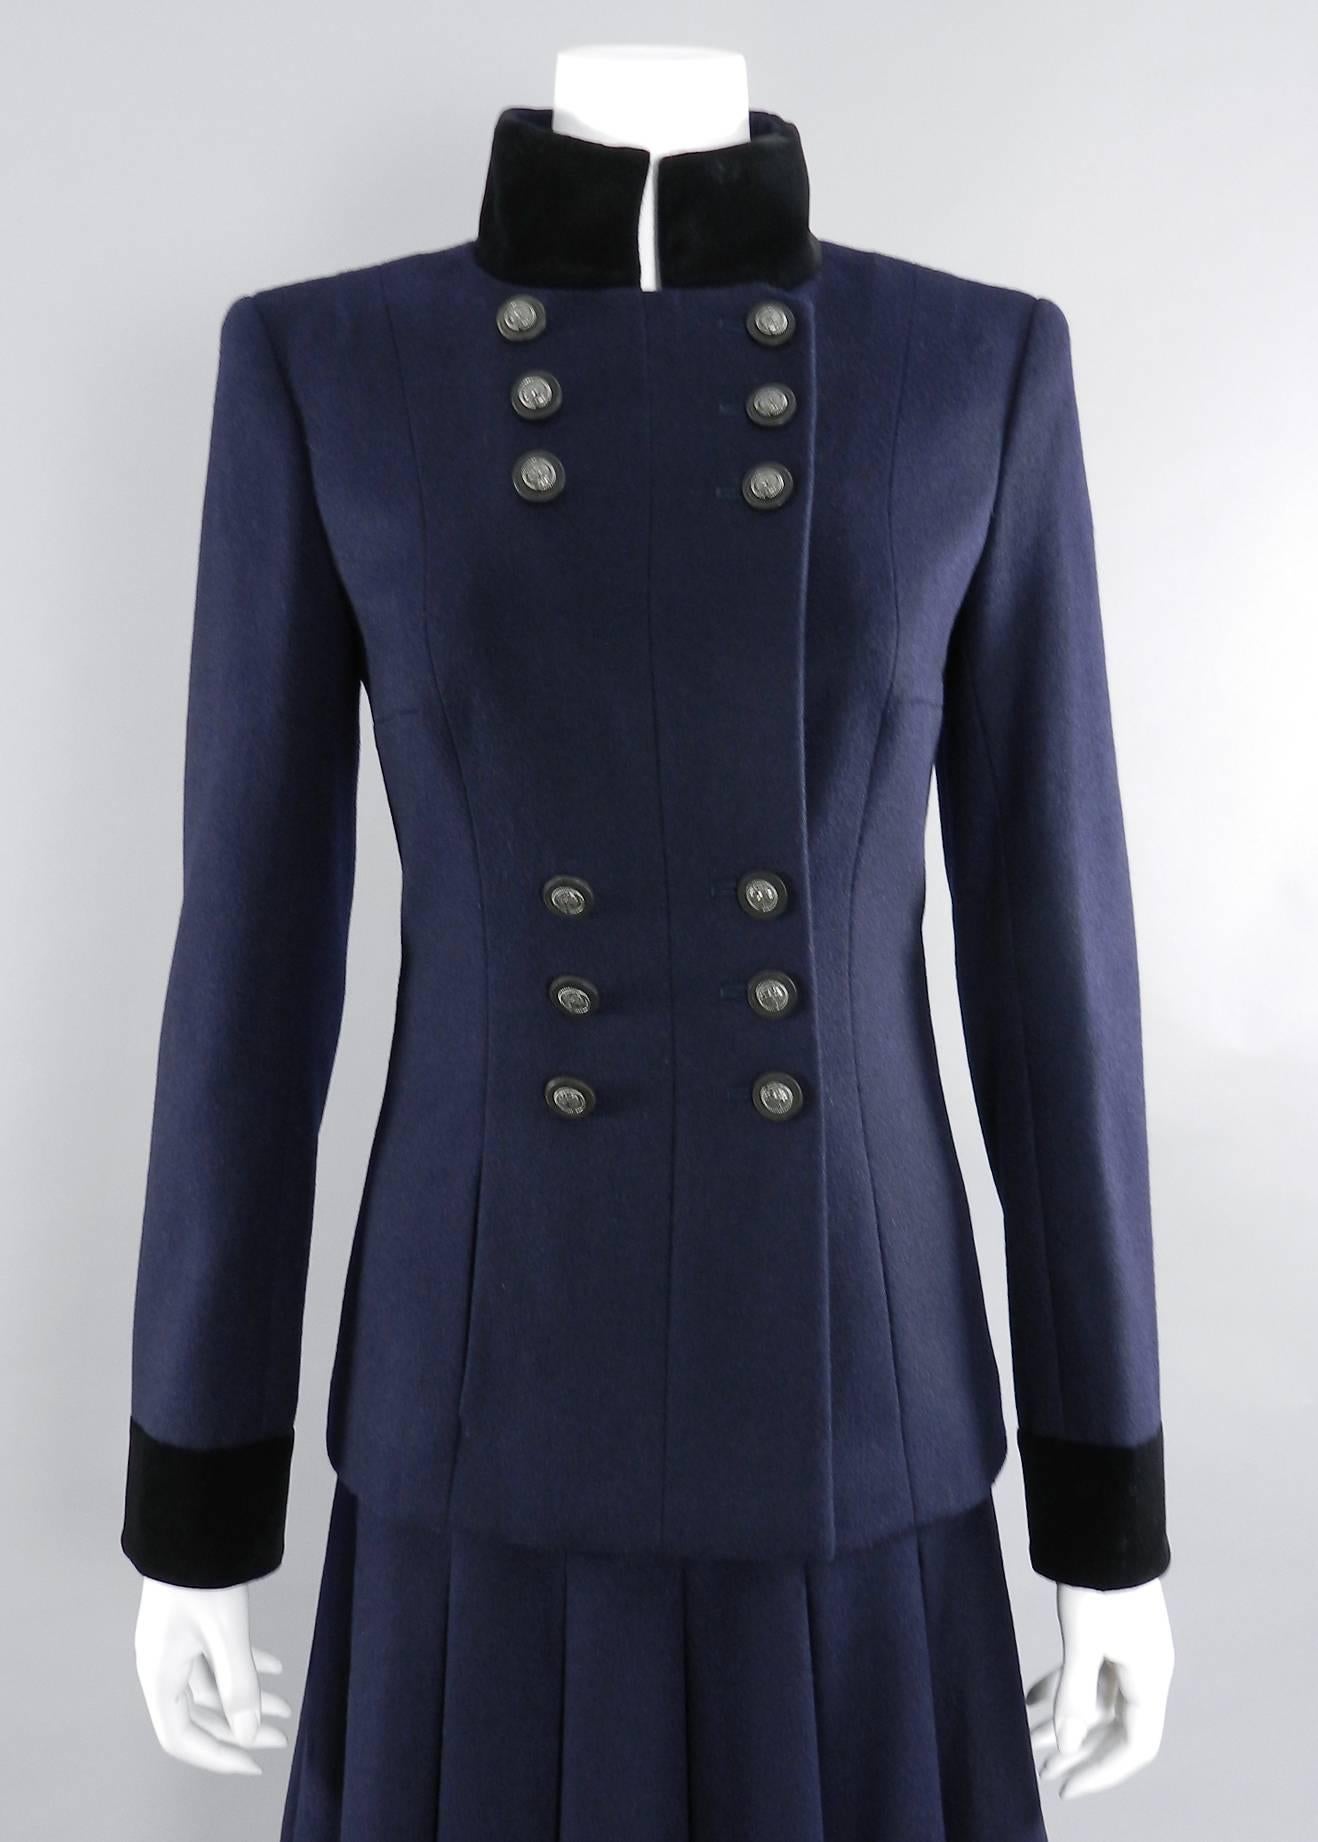 Chanel 2014 pre-fall paris dallas runway collection navy wool Military Jacket 2